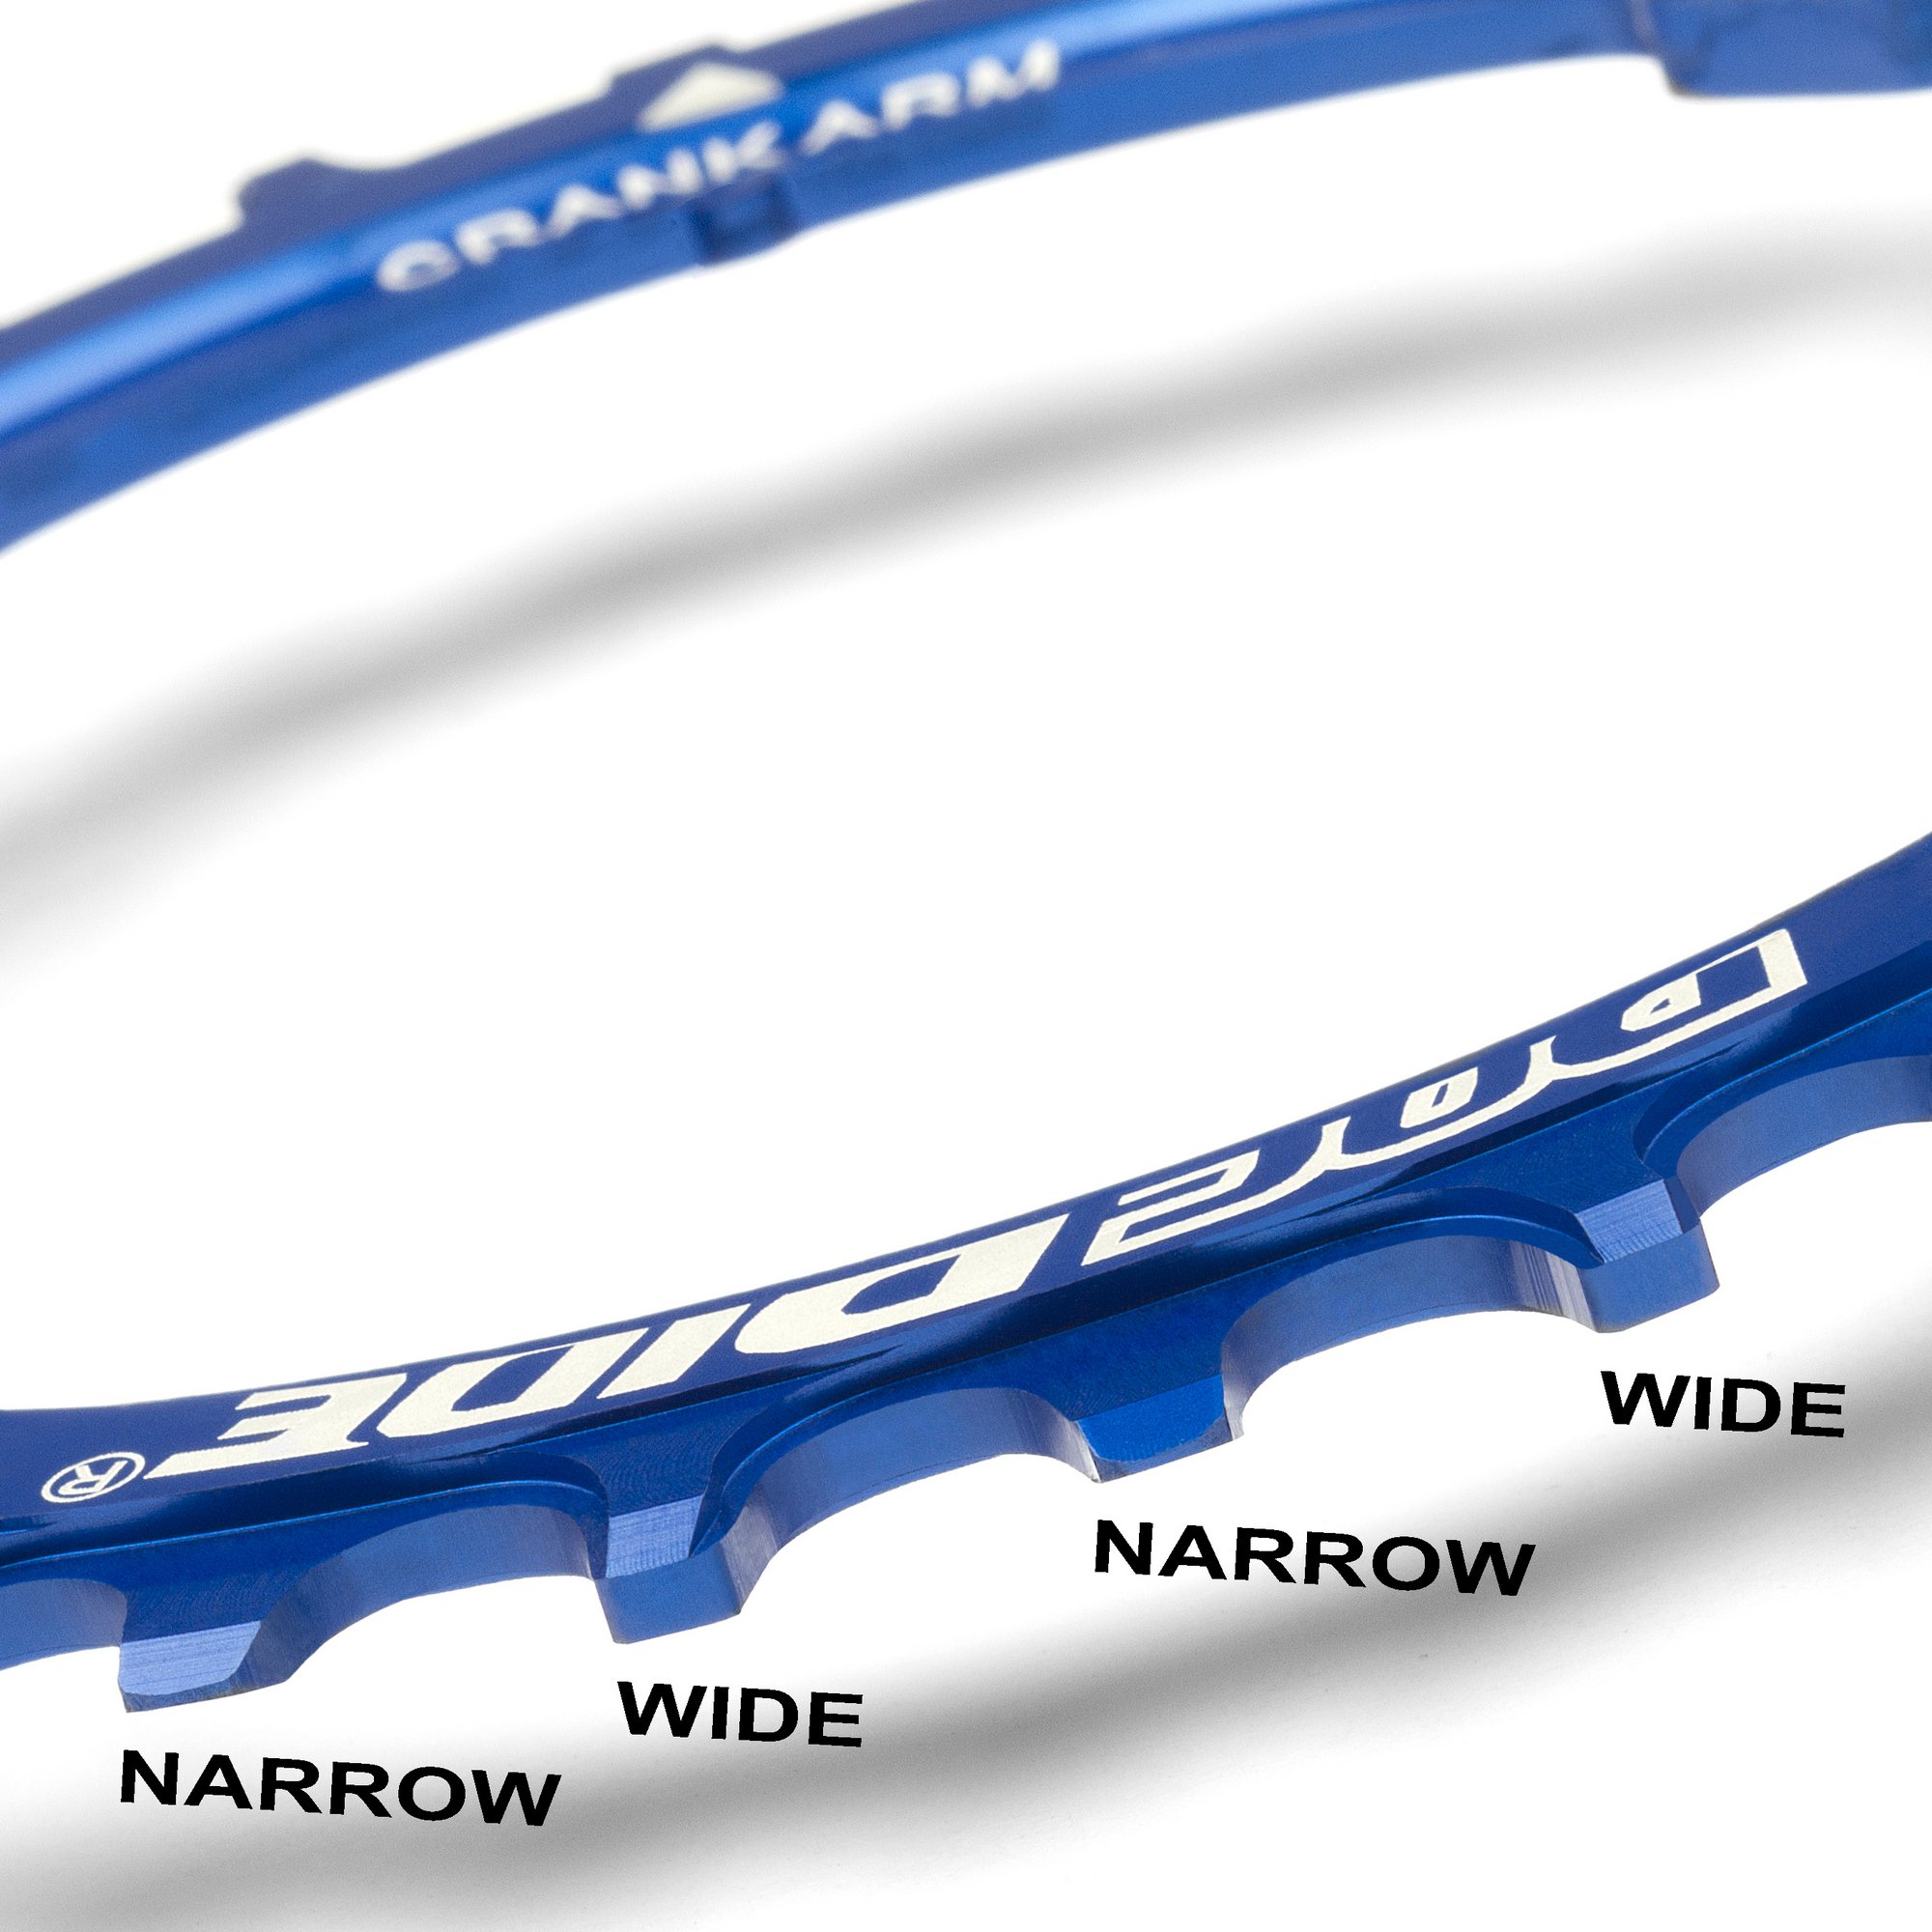 30T Narrow Wide Chainring 104 BCD Blue Aluminum With 4 Blue Aluminum Bolts By RocRide For 9/10/11 Speed. - image 4 of 5